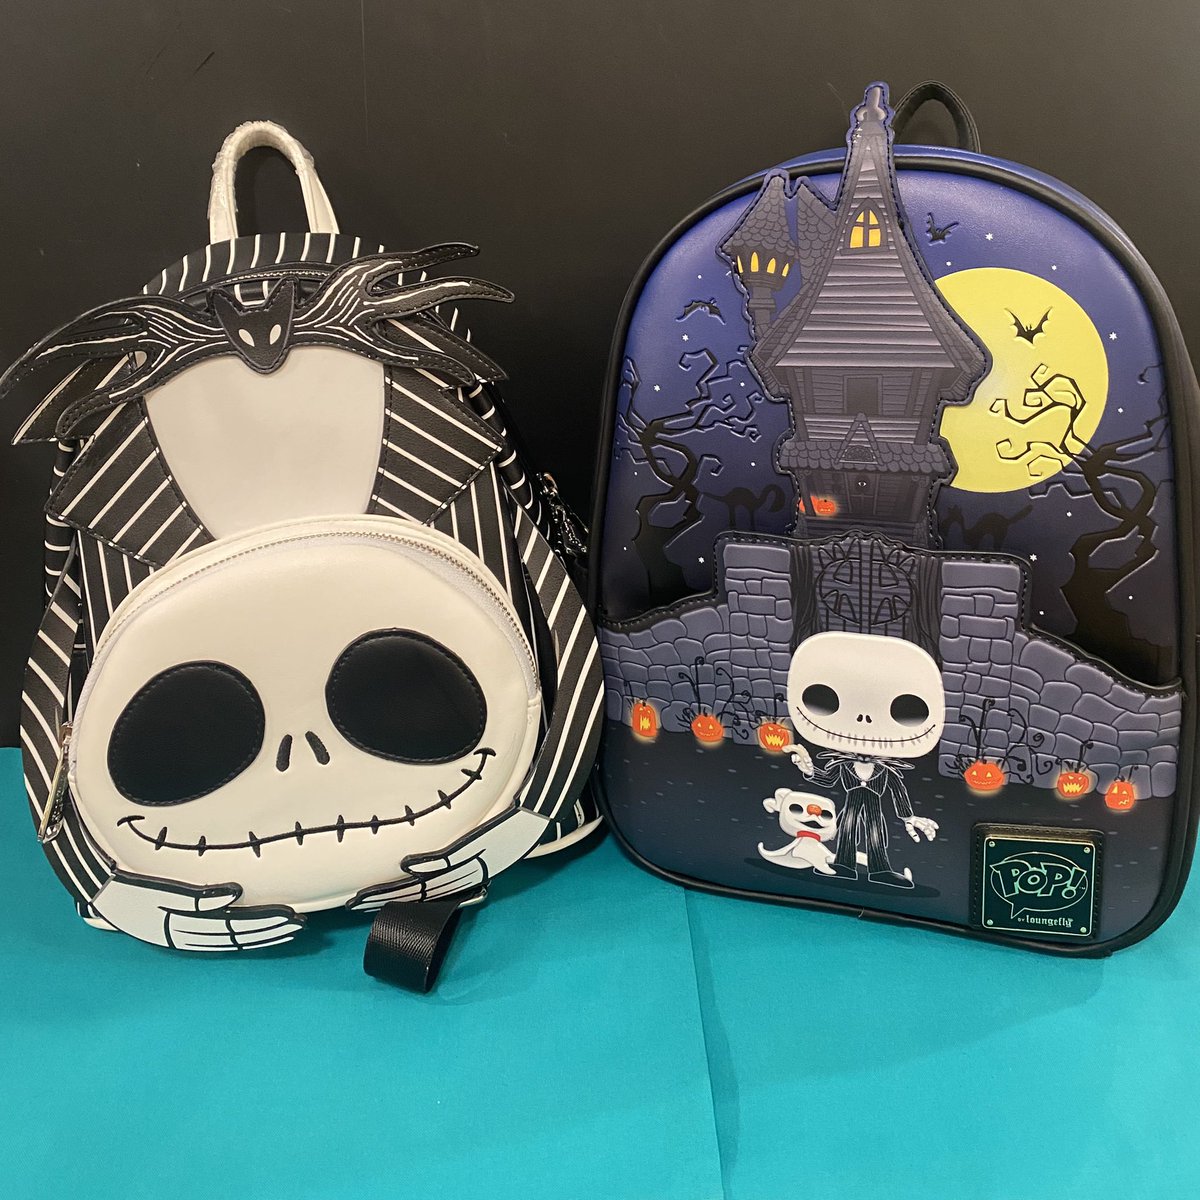 NIGHTMARE BEFORE CHRISTMAS🎃 Check out this stunning #Sally #NightmareBeforeChristmas @Loungefly bag just arrived in-store 😍 #Loungefly #disney #loungeflydisney #disneyloungefly #loungeflycollector #disneystyle #loungeflybackpack #loungeflycollection #loungeflyaddict #funko